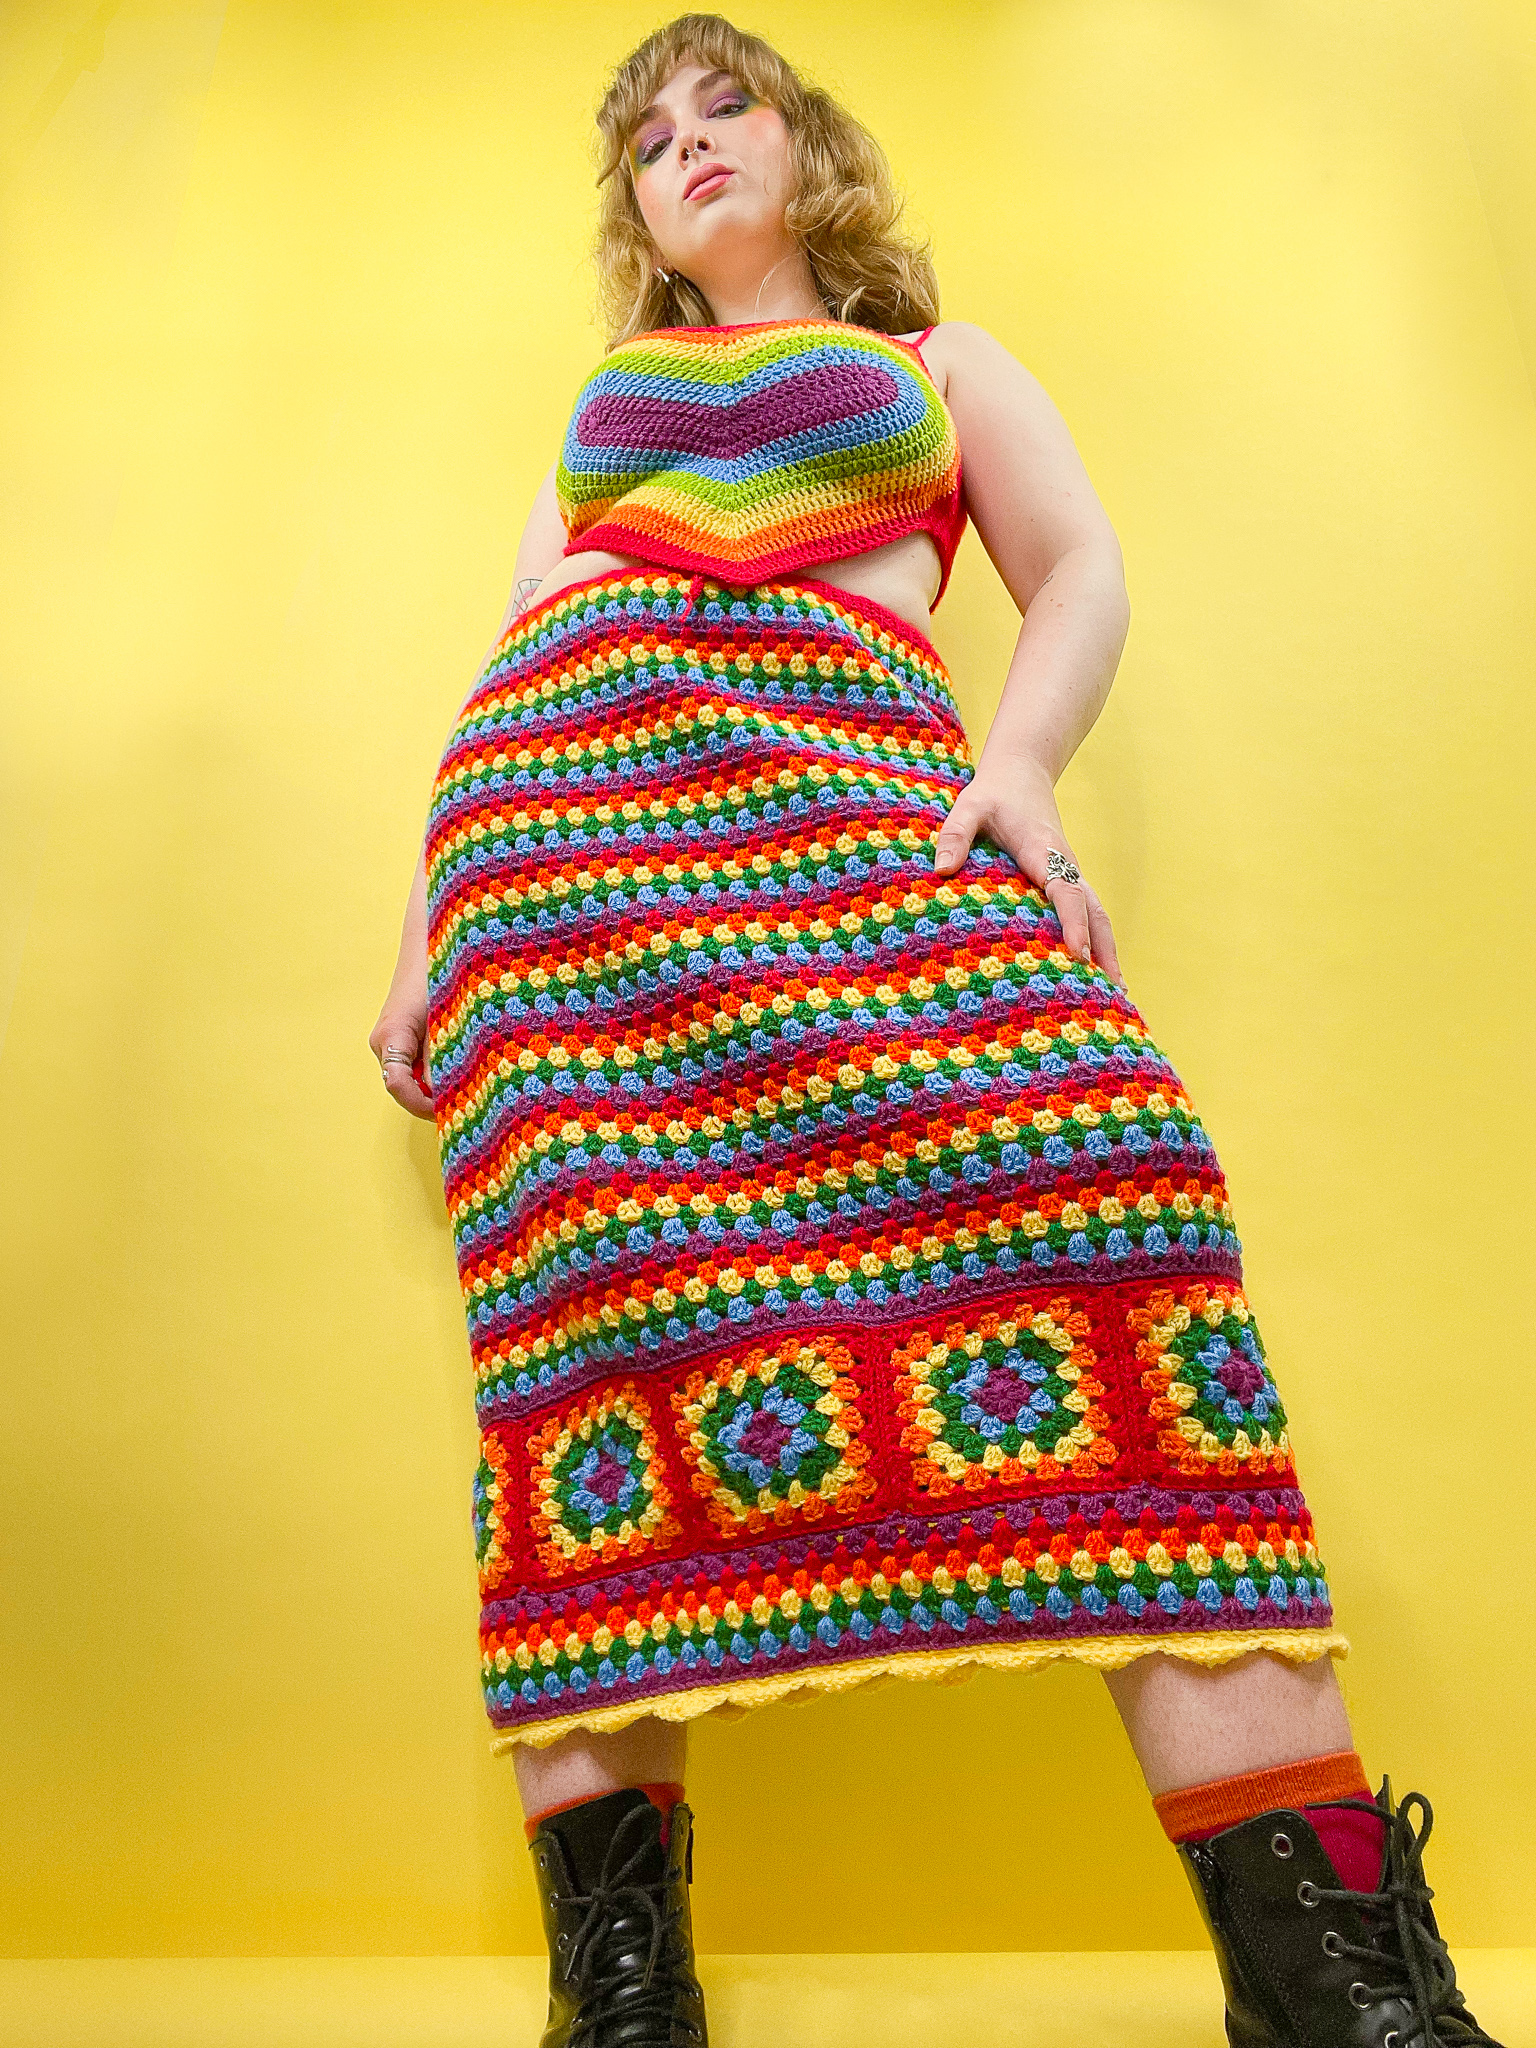 a woman in a rainbow colored dress